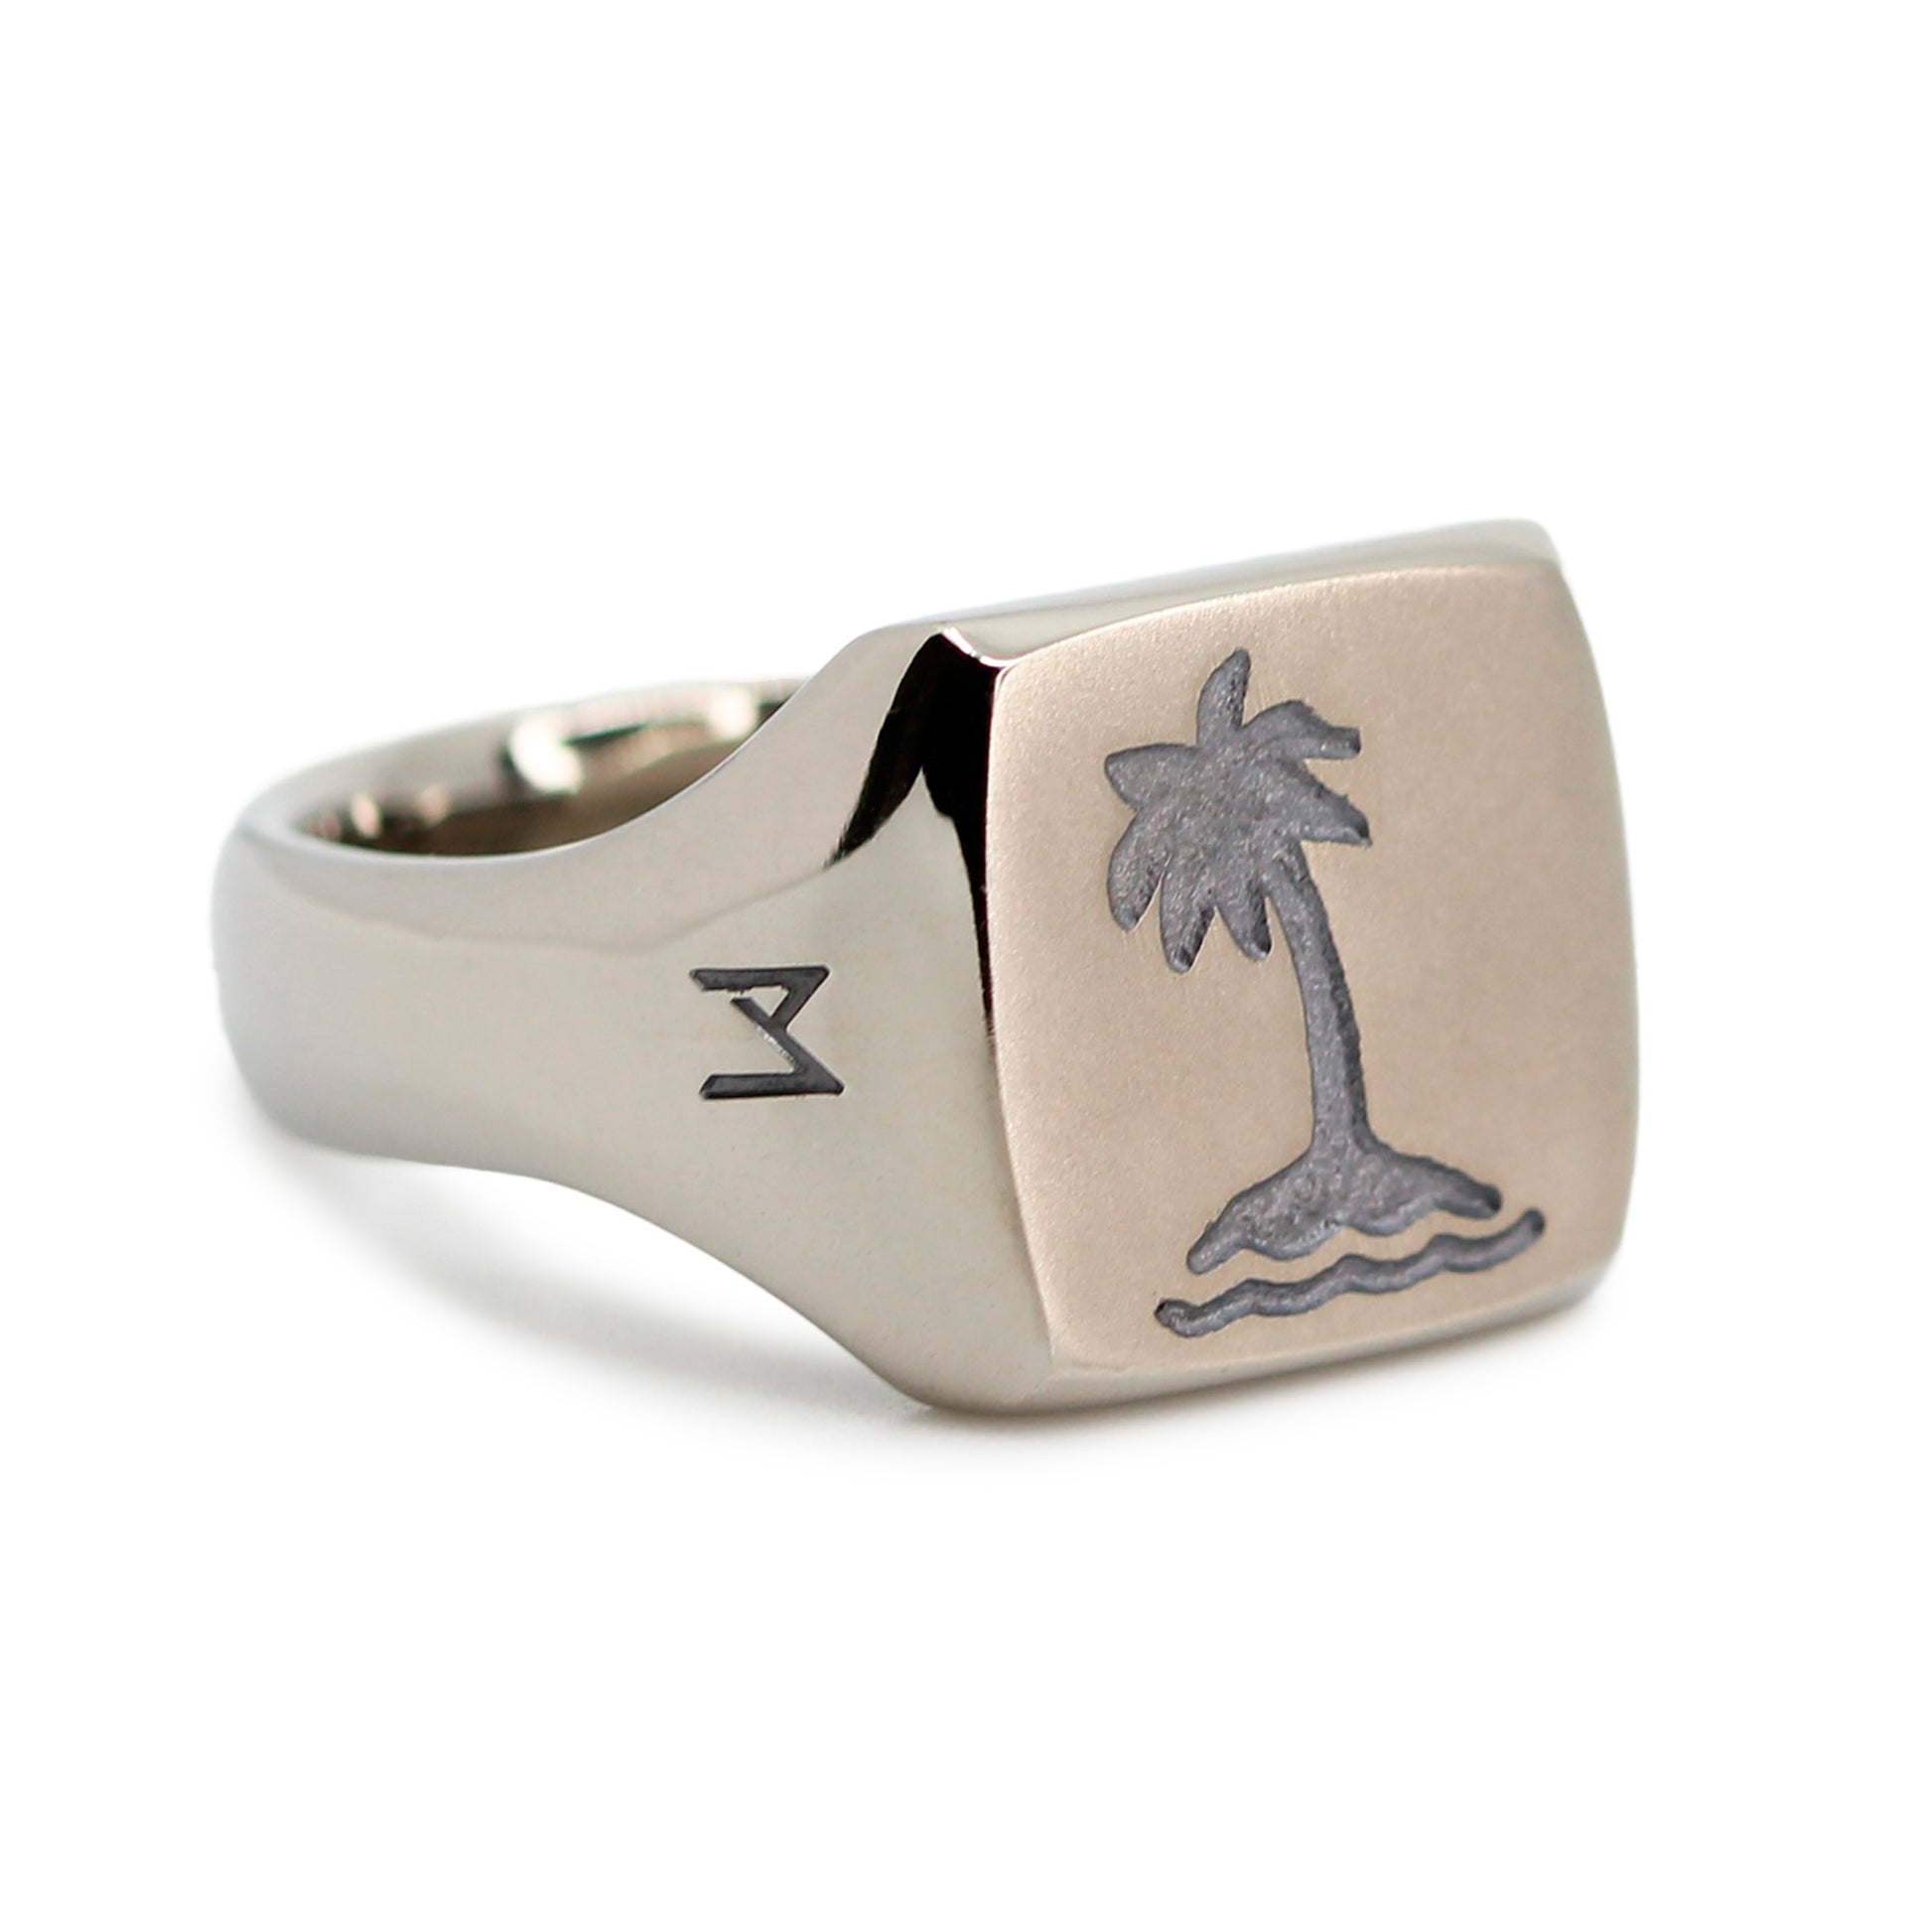 Single silver-colored titanium signet ring, 15x15 mm wide surface with an engraved palm tree. Image shows corner view of the ring